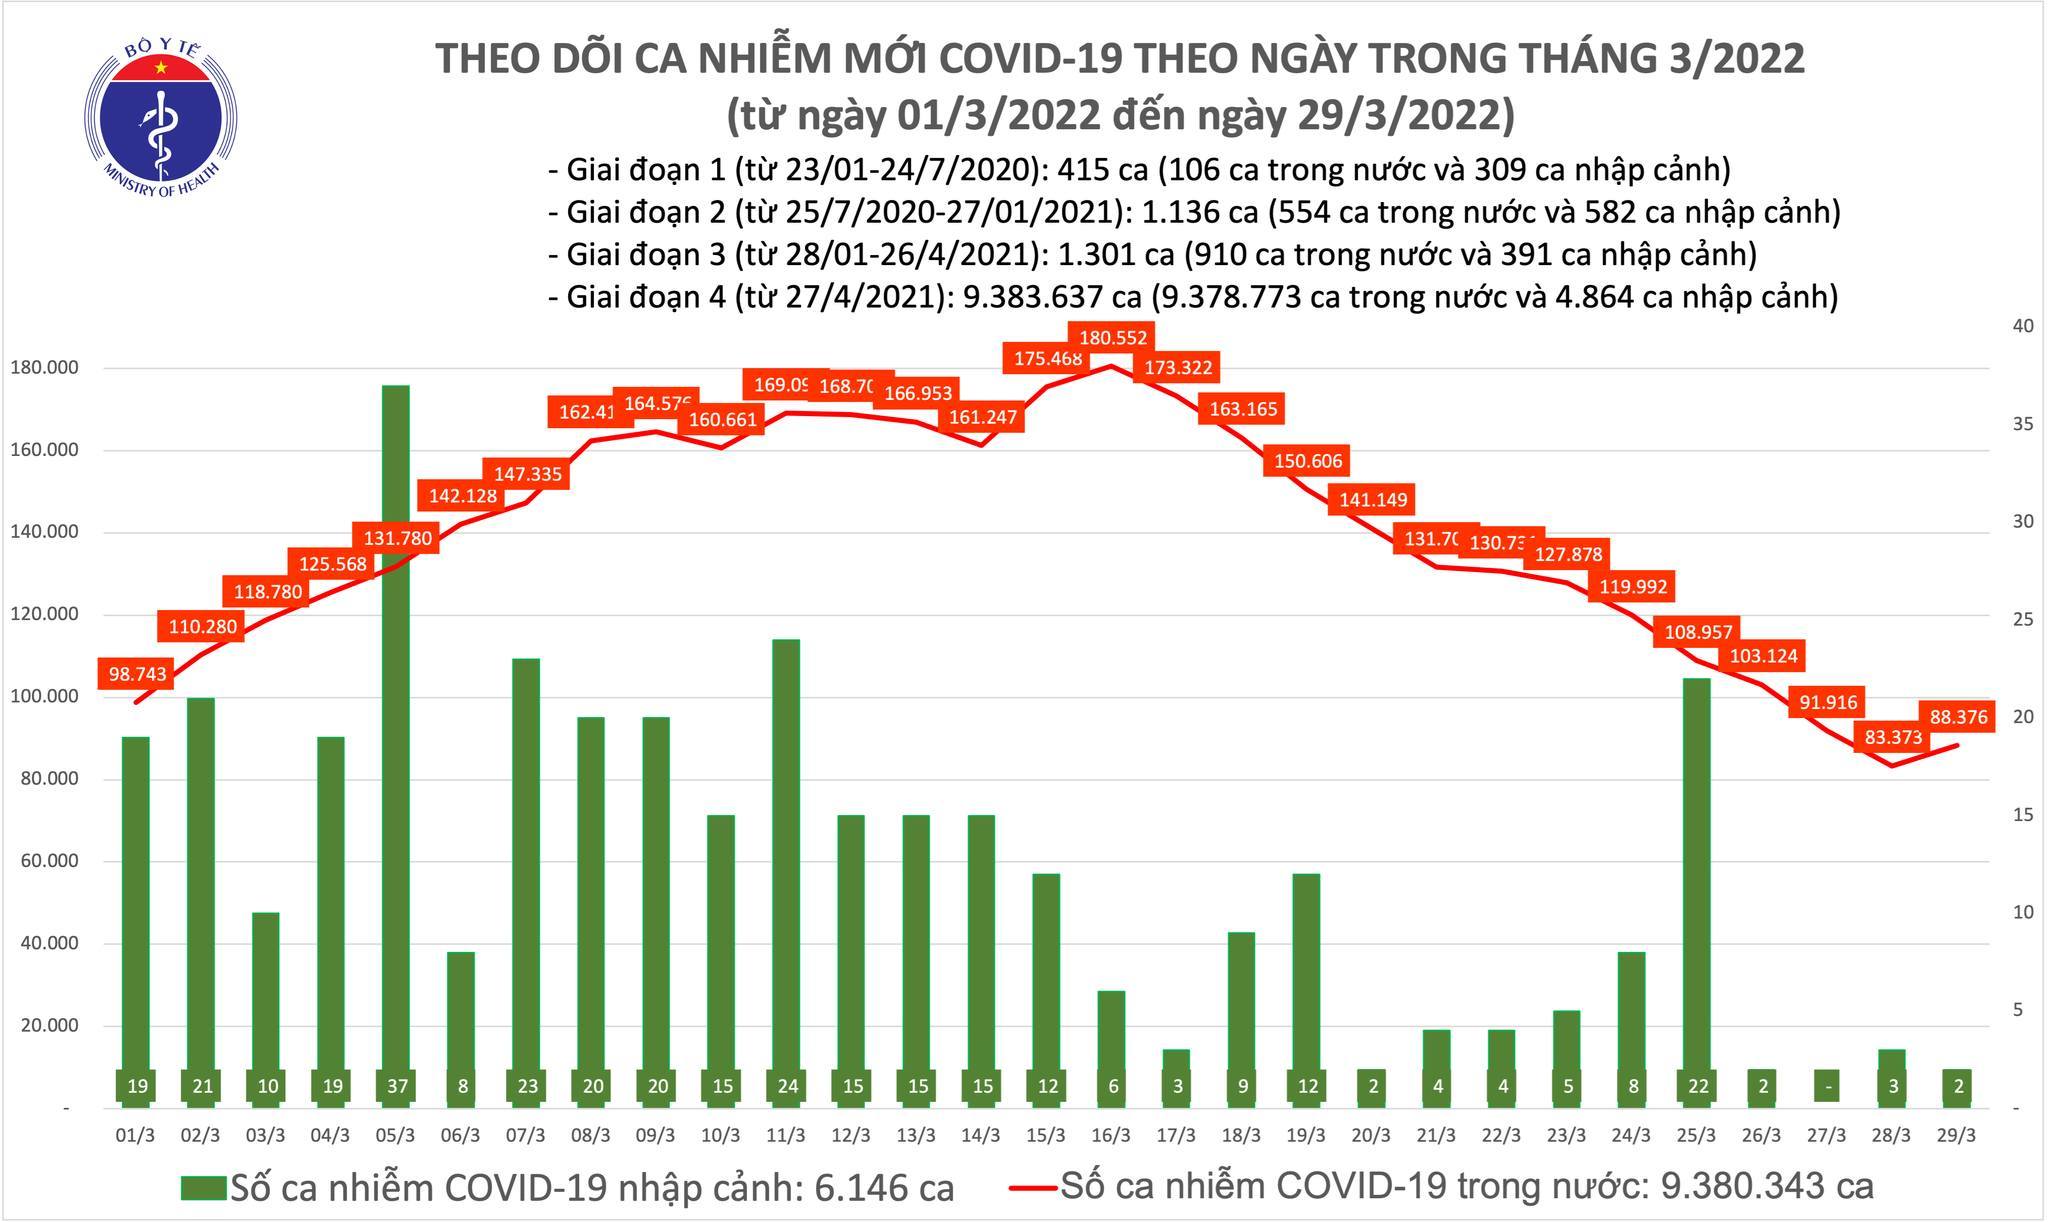 The whole country added 88,378 cases of Covid-19, Hanoi still leads the number of cases